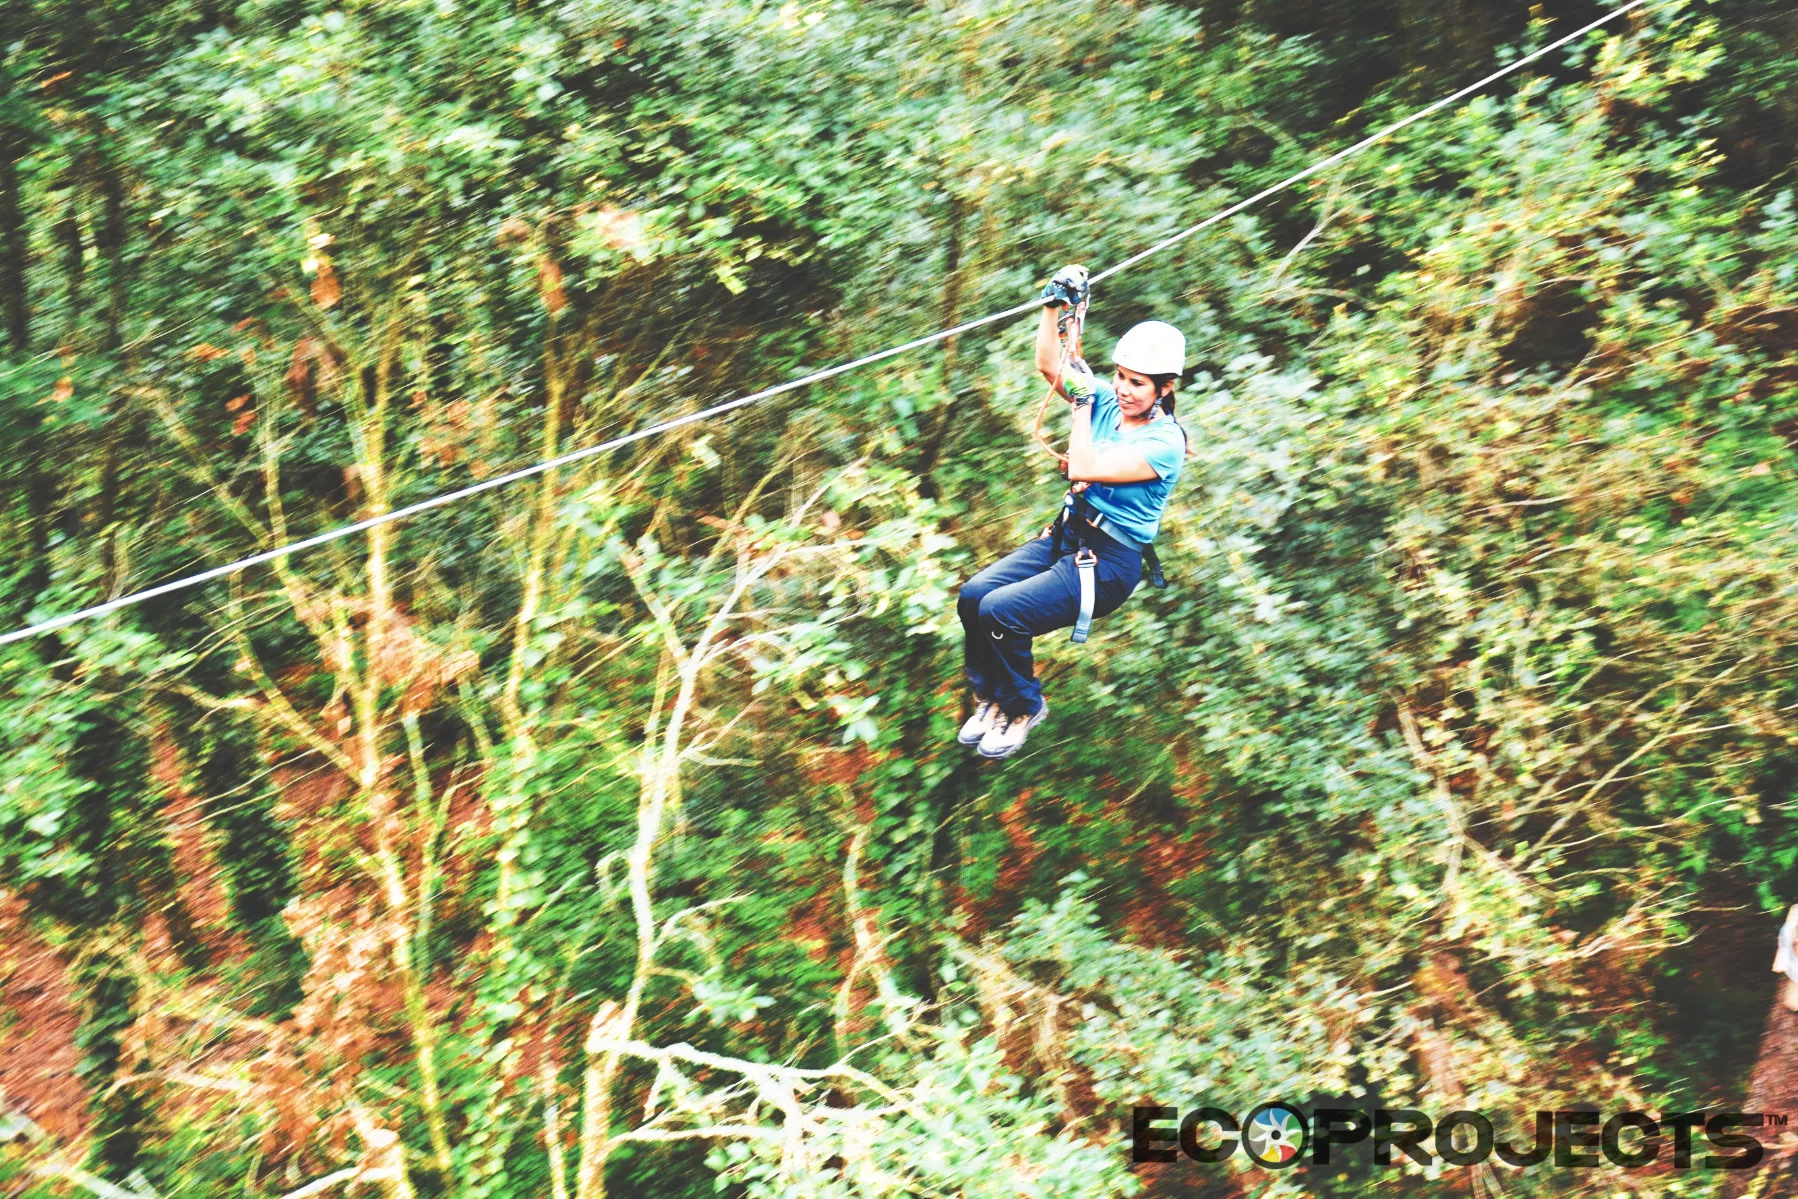 Ecoproparks. Canopy Tour 10.